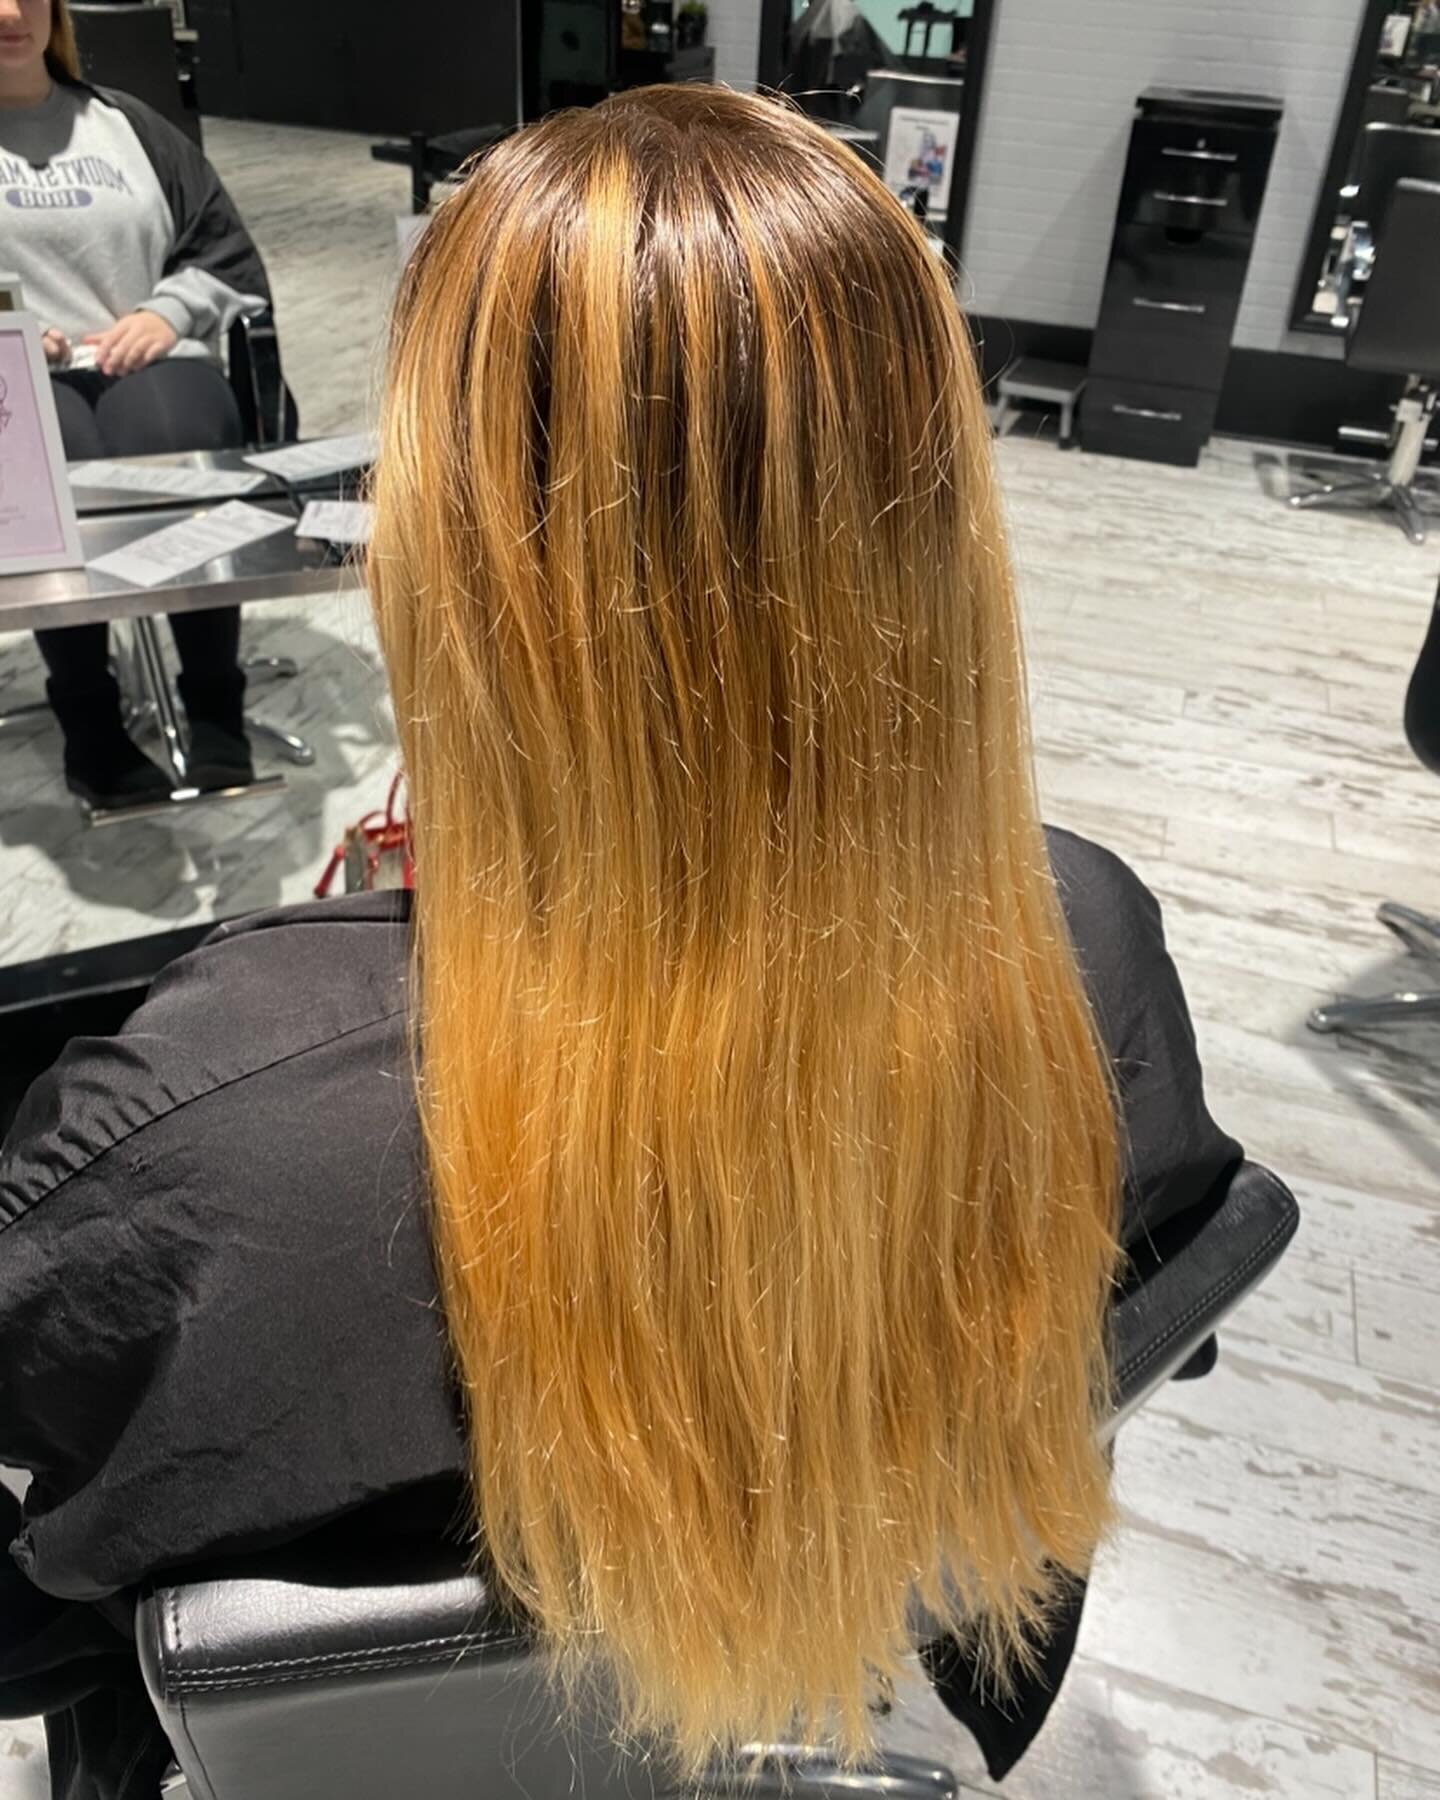 Highlights and lowlights to add depth and dimension giving her a refreshed and vibrant look🥰❣️